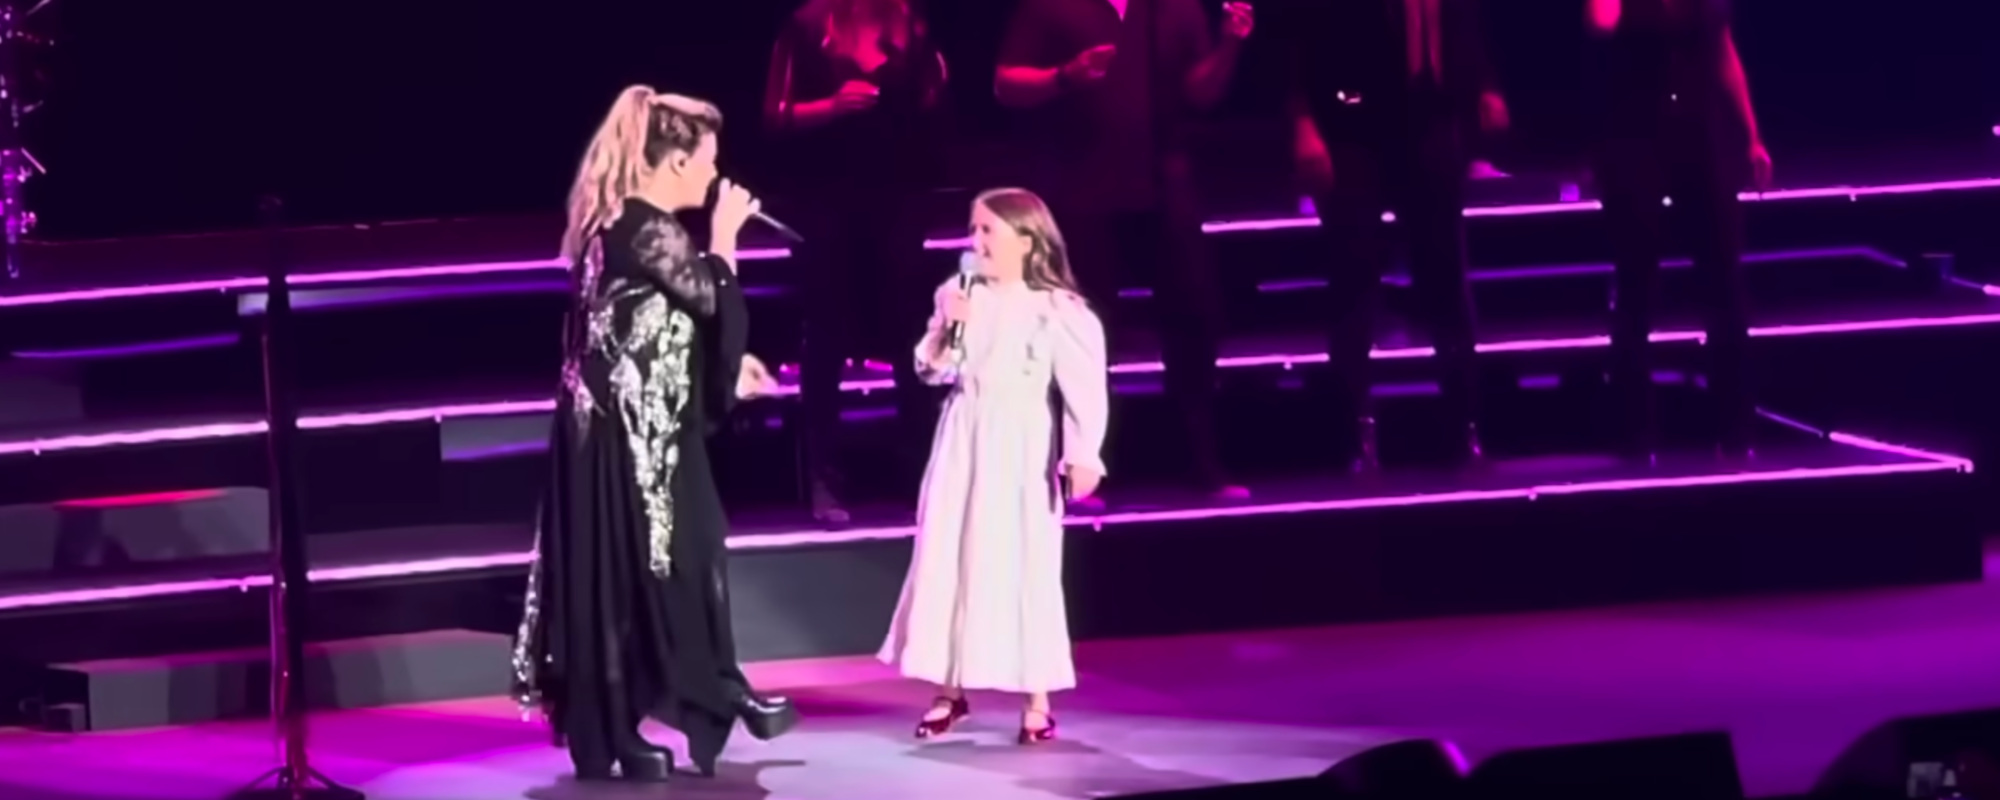 Kelly Clarkson and Her Daughter Duet on “Heartbeat Song” in Las Vegas